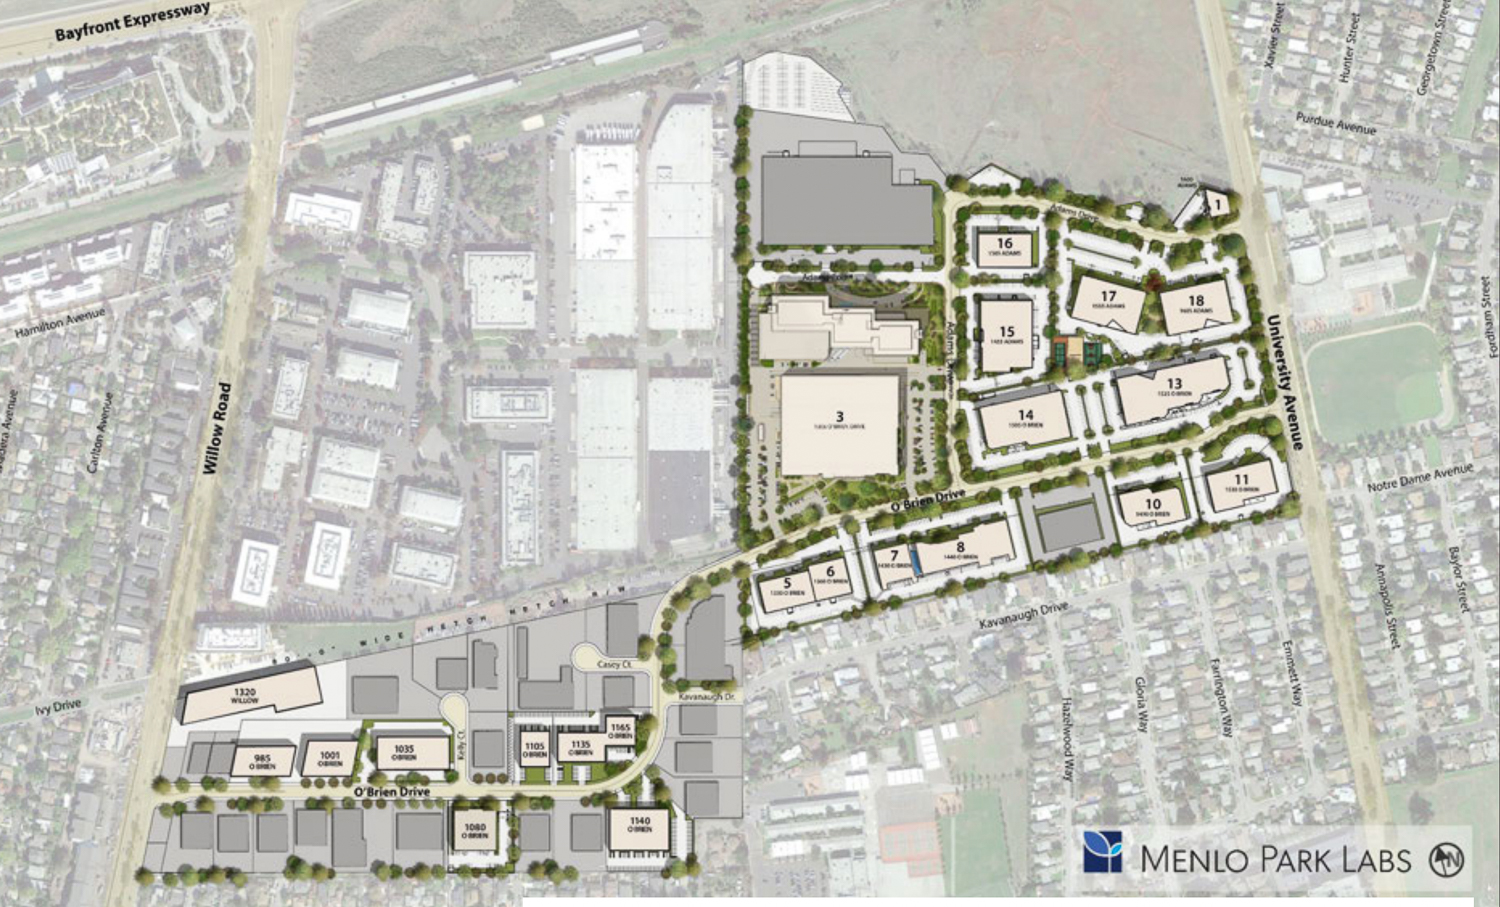 Menlo Park Laps site map, with 1350 Adrian Court unlabeled above Building 3, map from Menlo Park Labs circa 2022